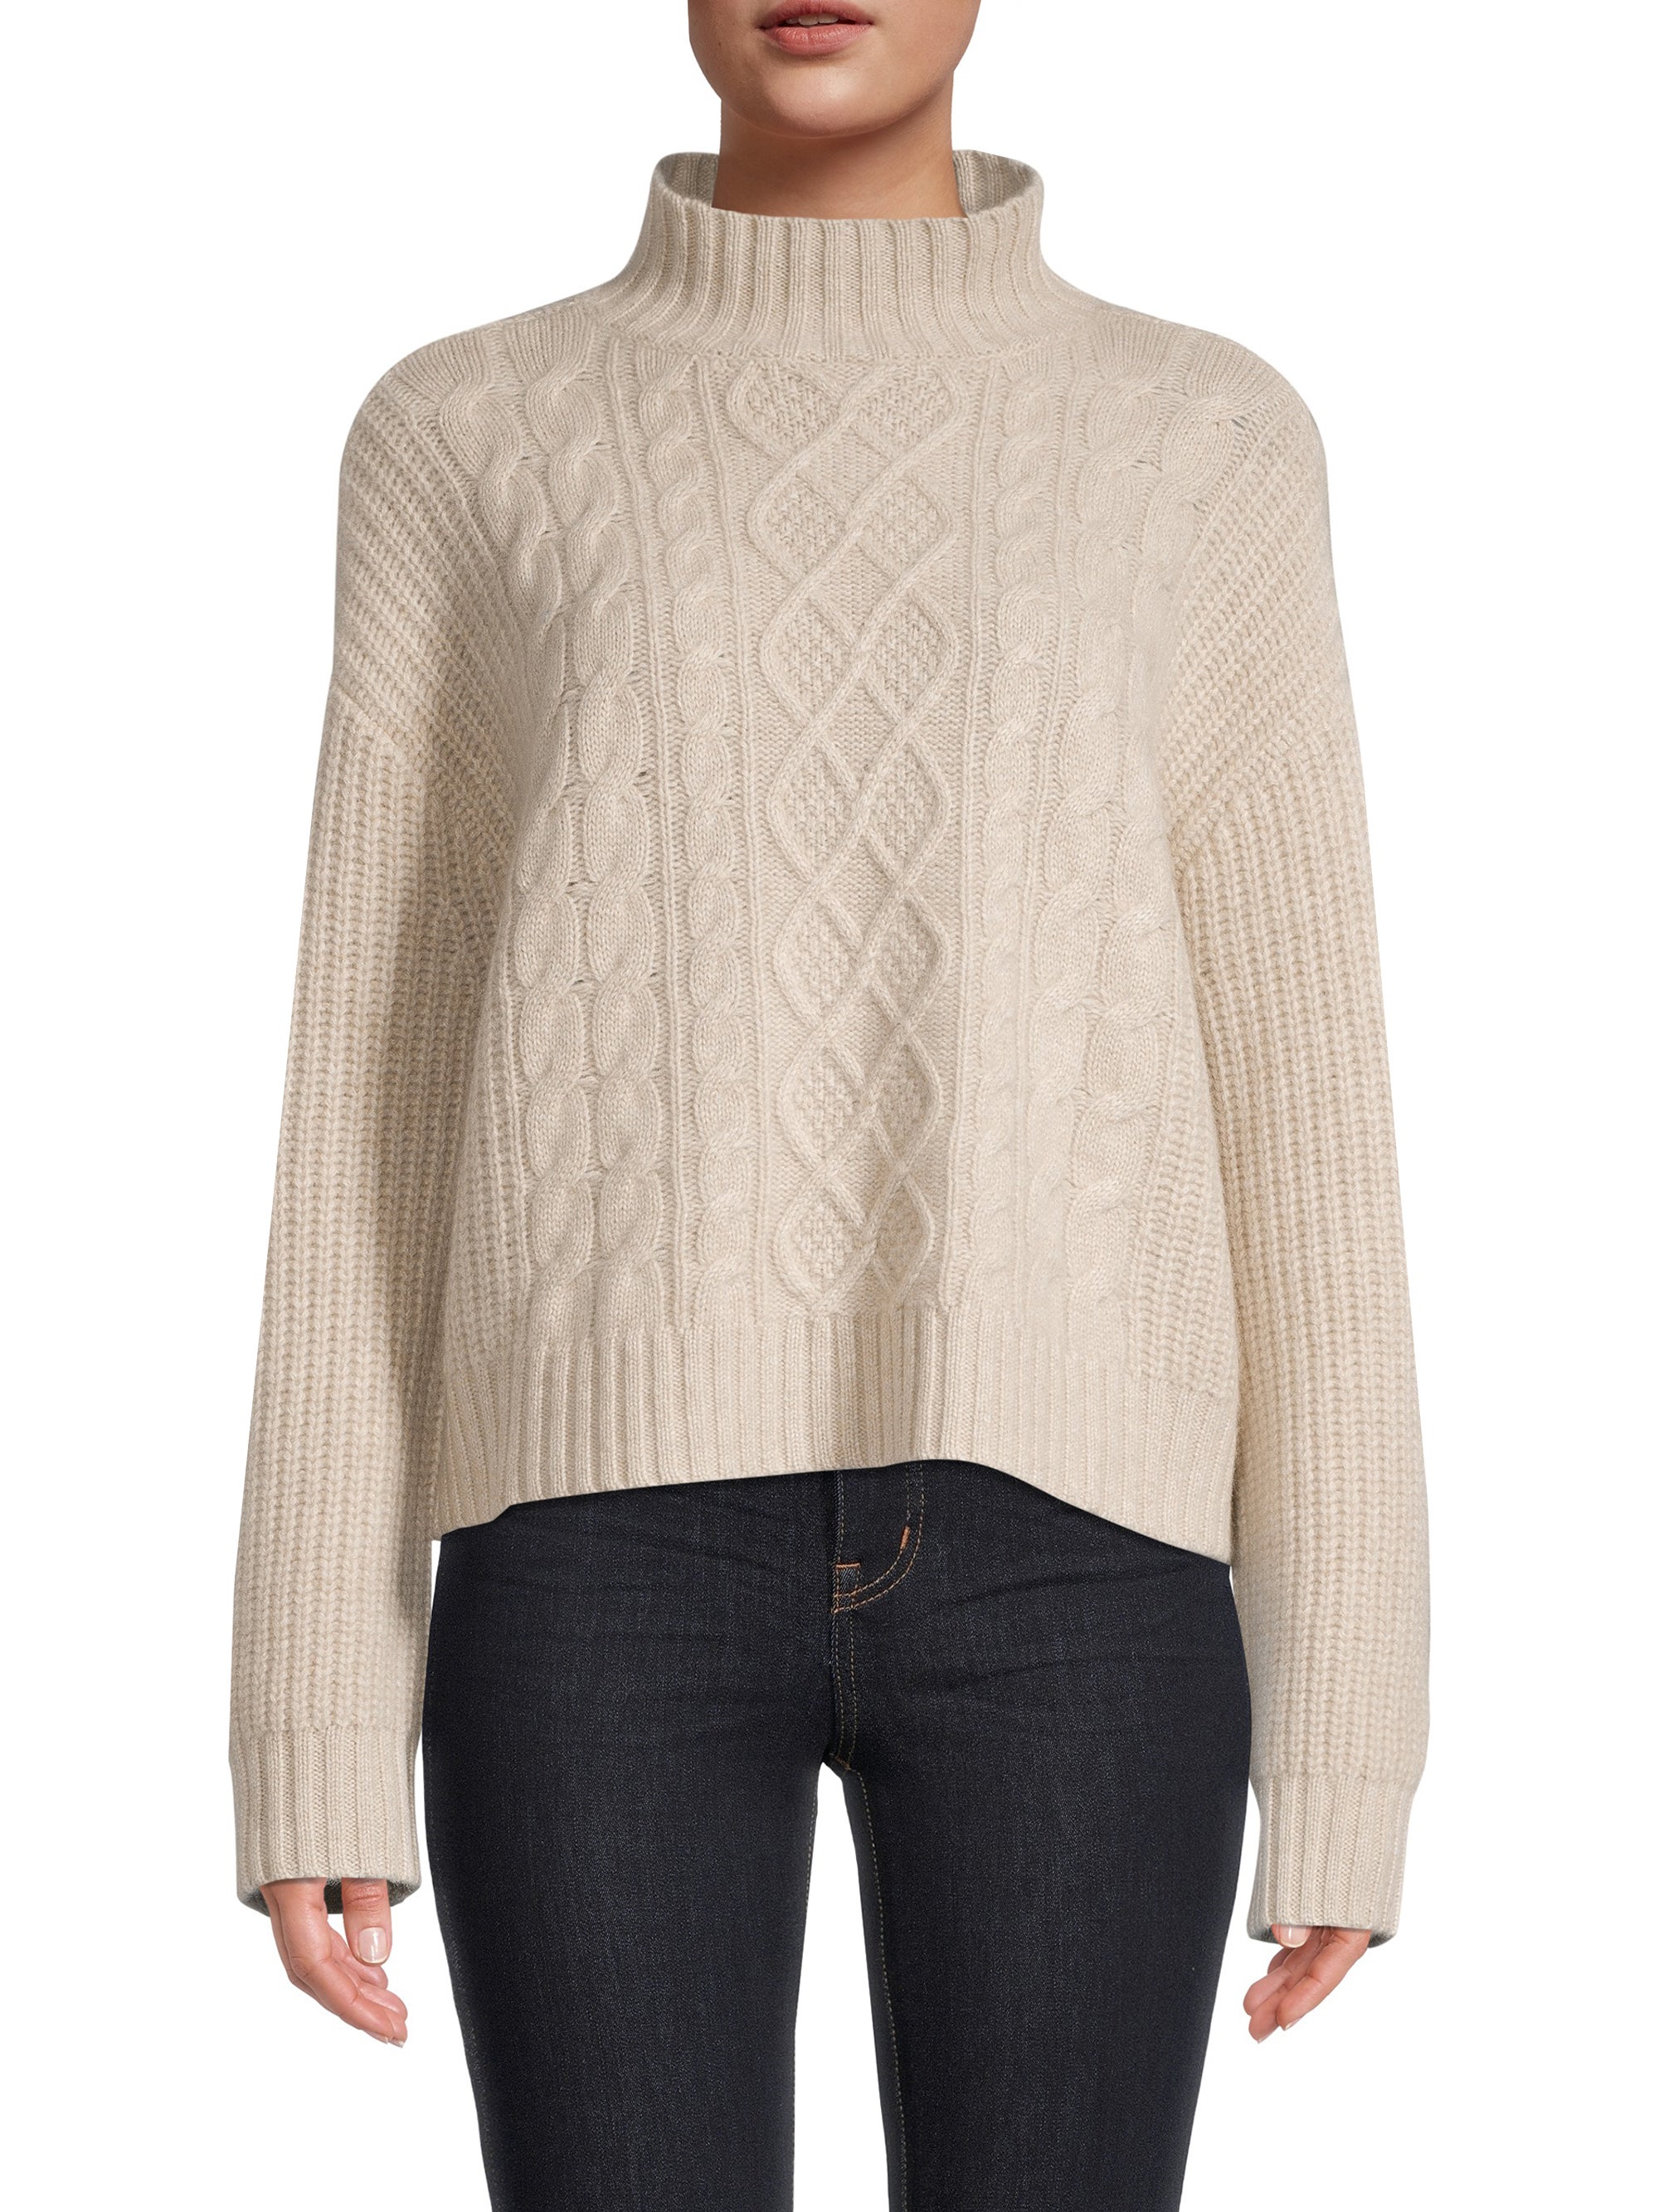 Hudson’s Bay + Cable-Knit Cashmere Turtleneck Sweater